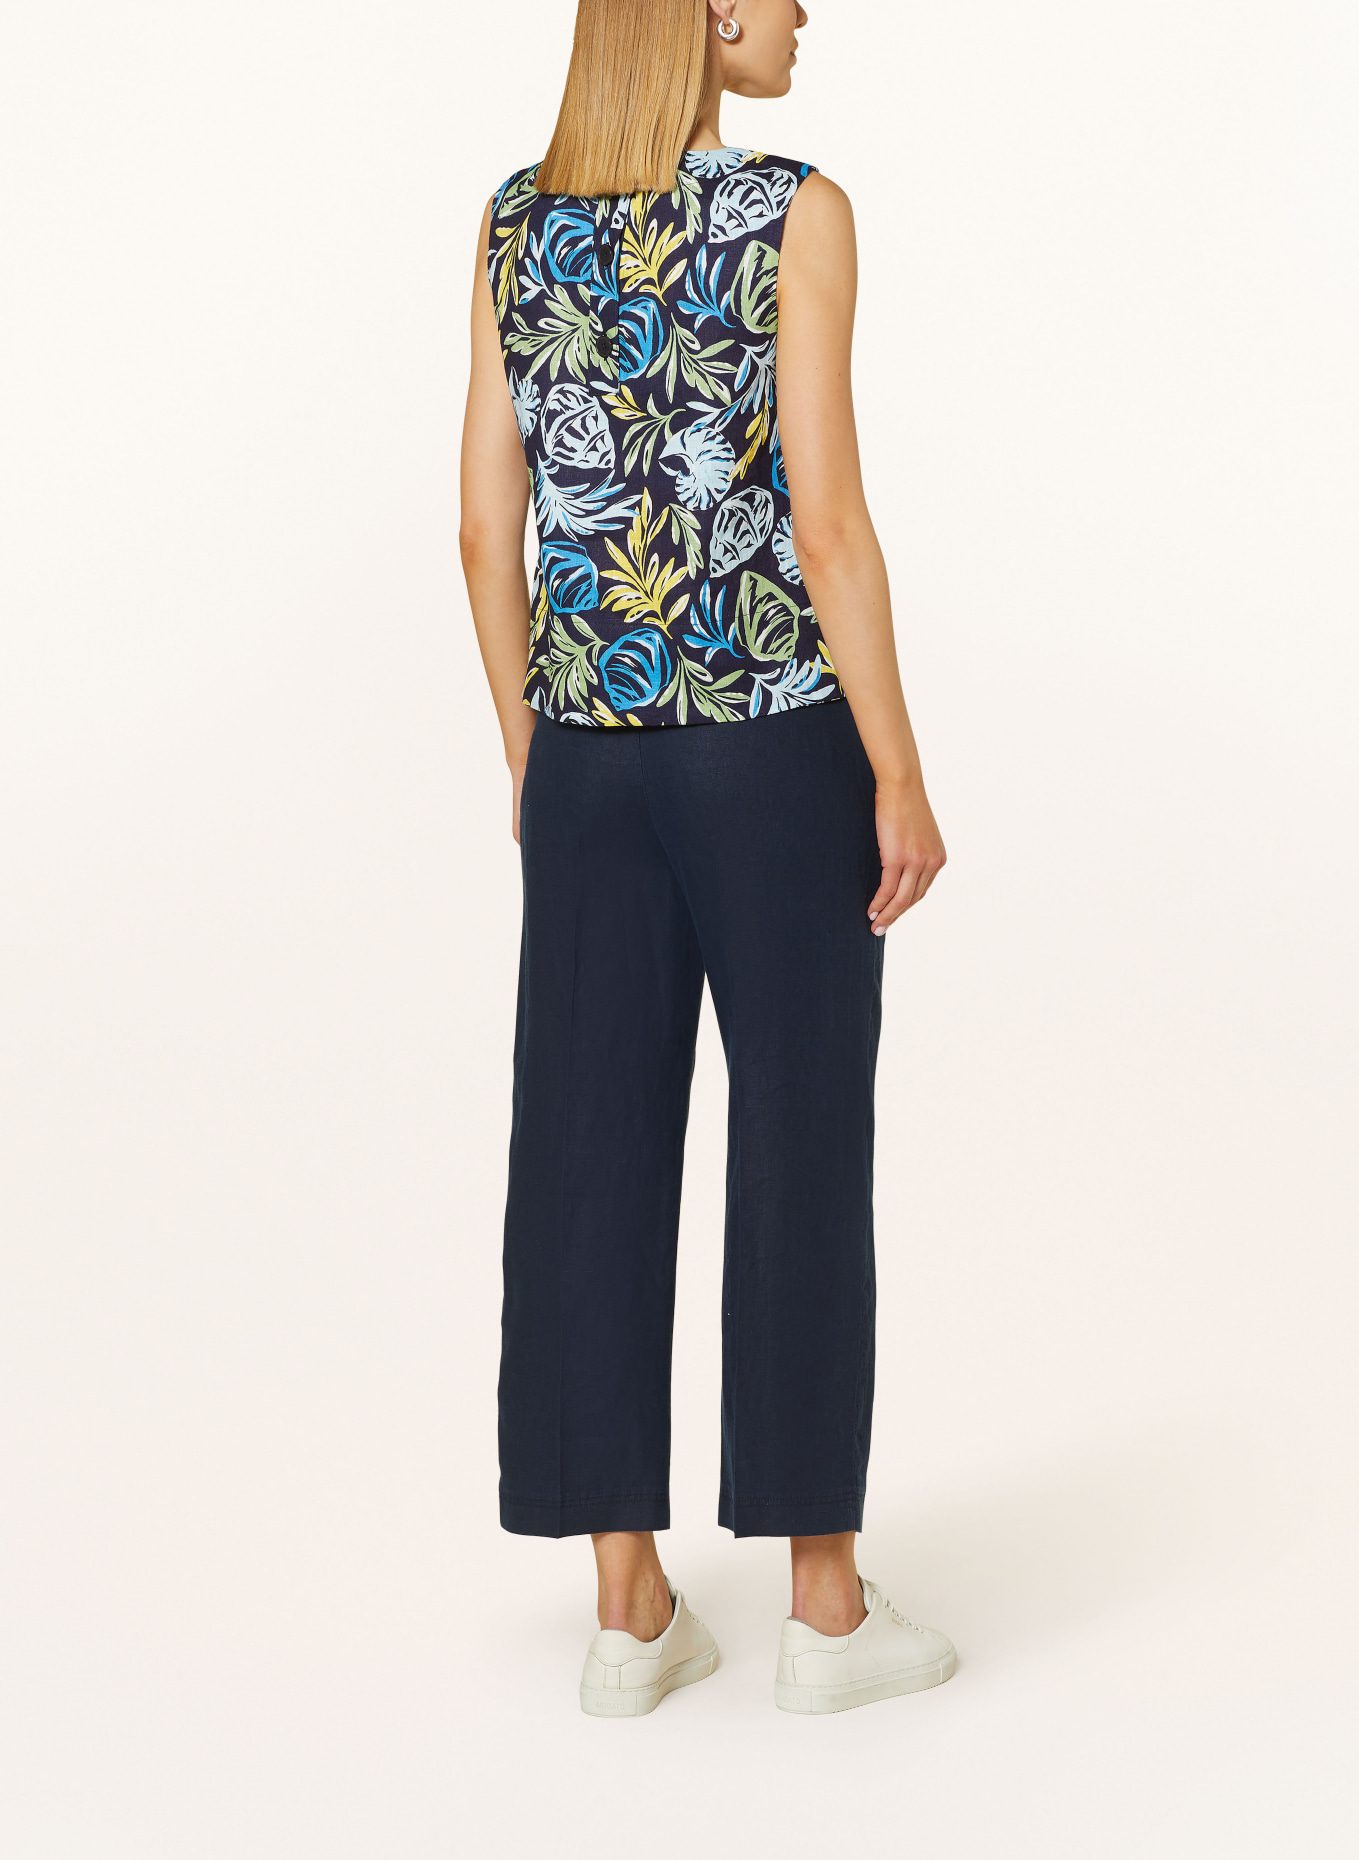 HOBBS Blouse top MALINDI in linen, Color: BLACK/ BLUE/ YELLOW (Image 3)